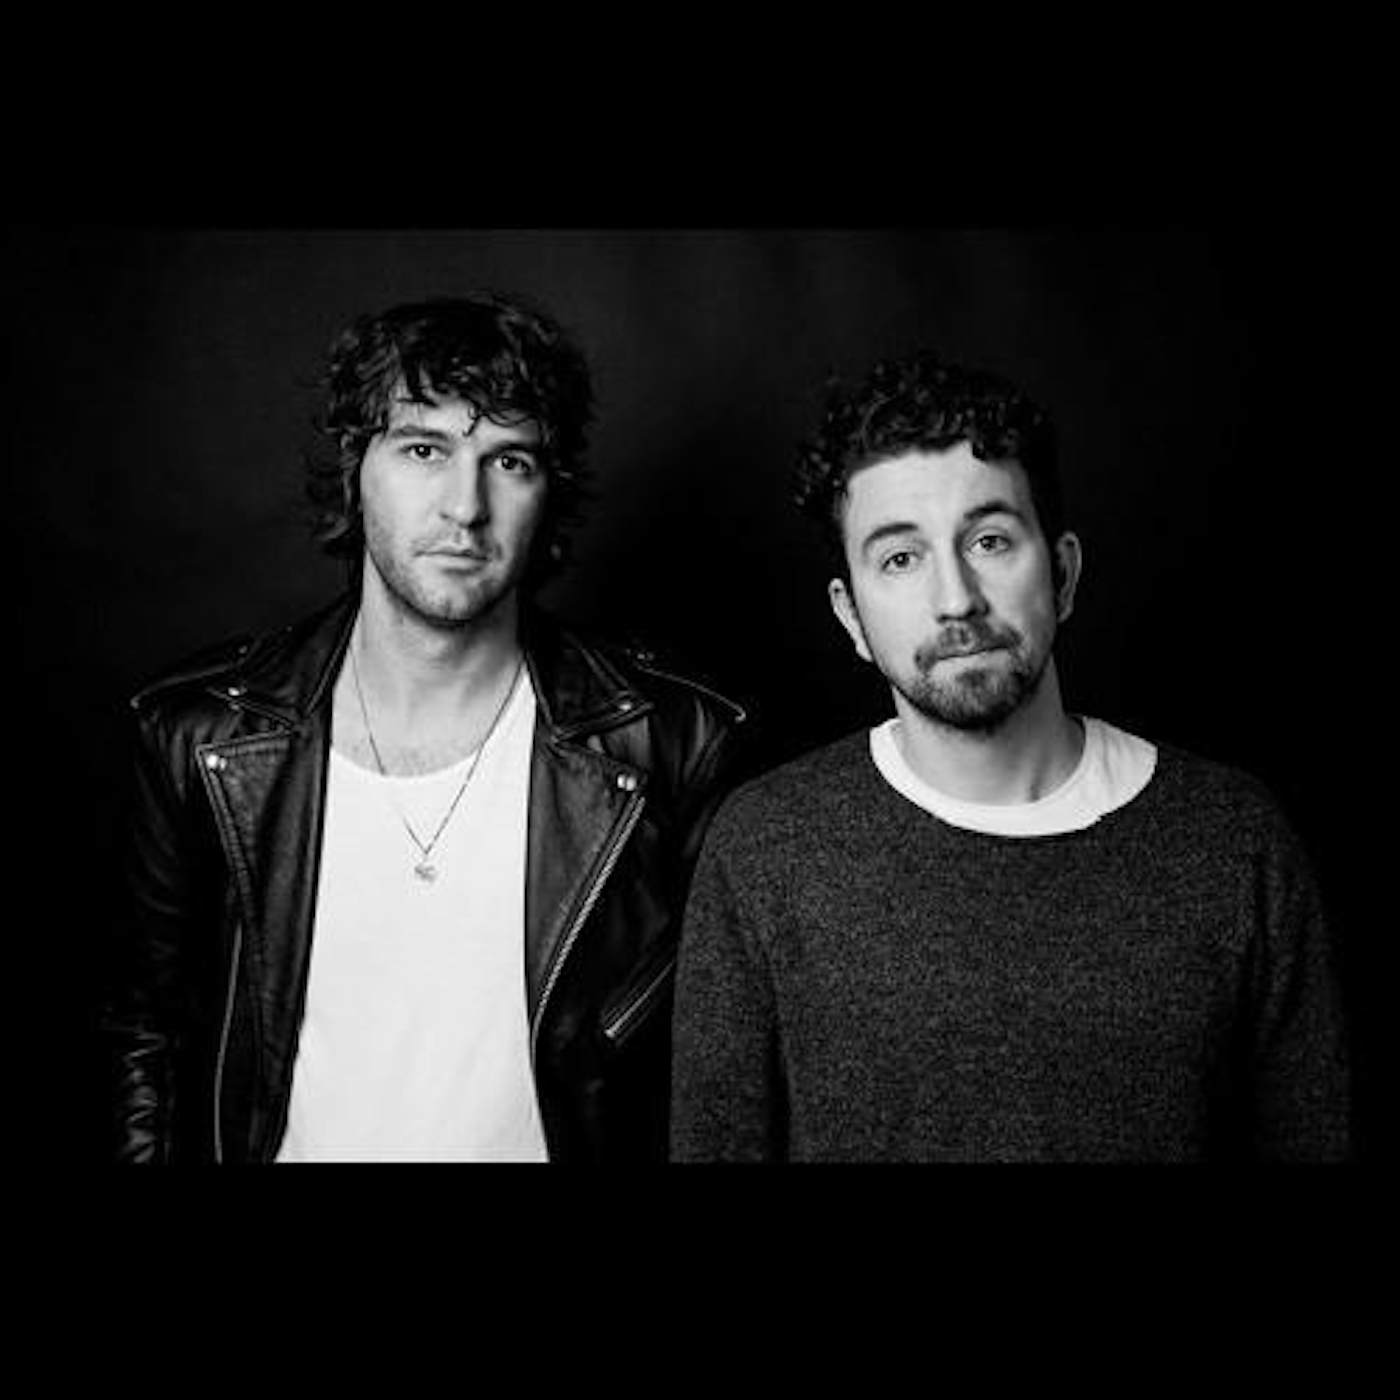 Japandroids NEAR TO THE WILD HEART OF LIFE (DL CARD) Vinyl Record